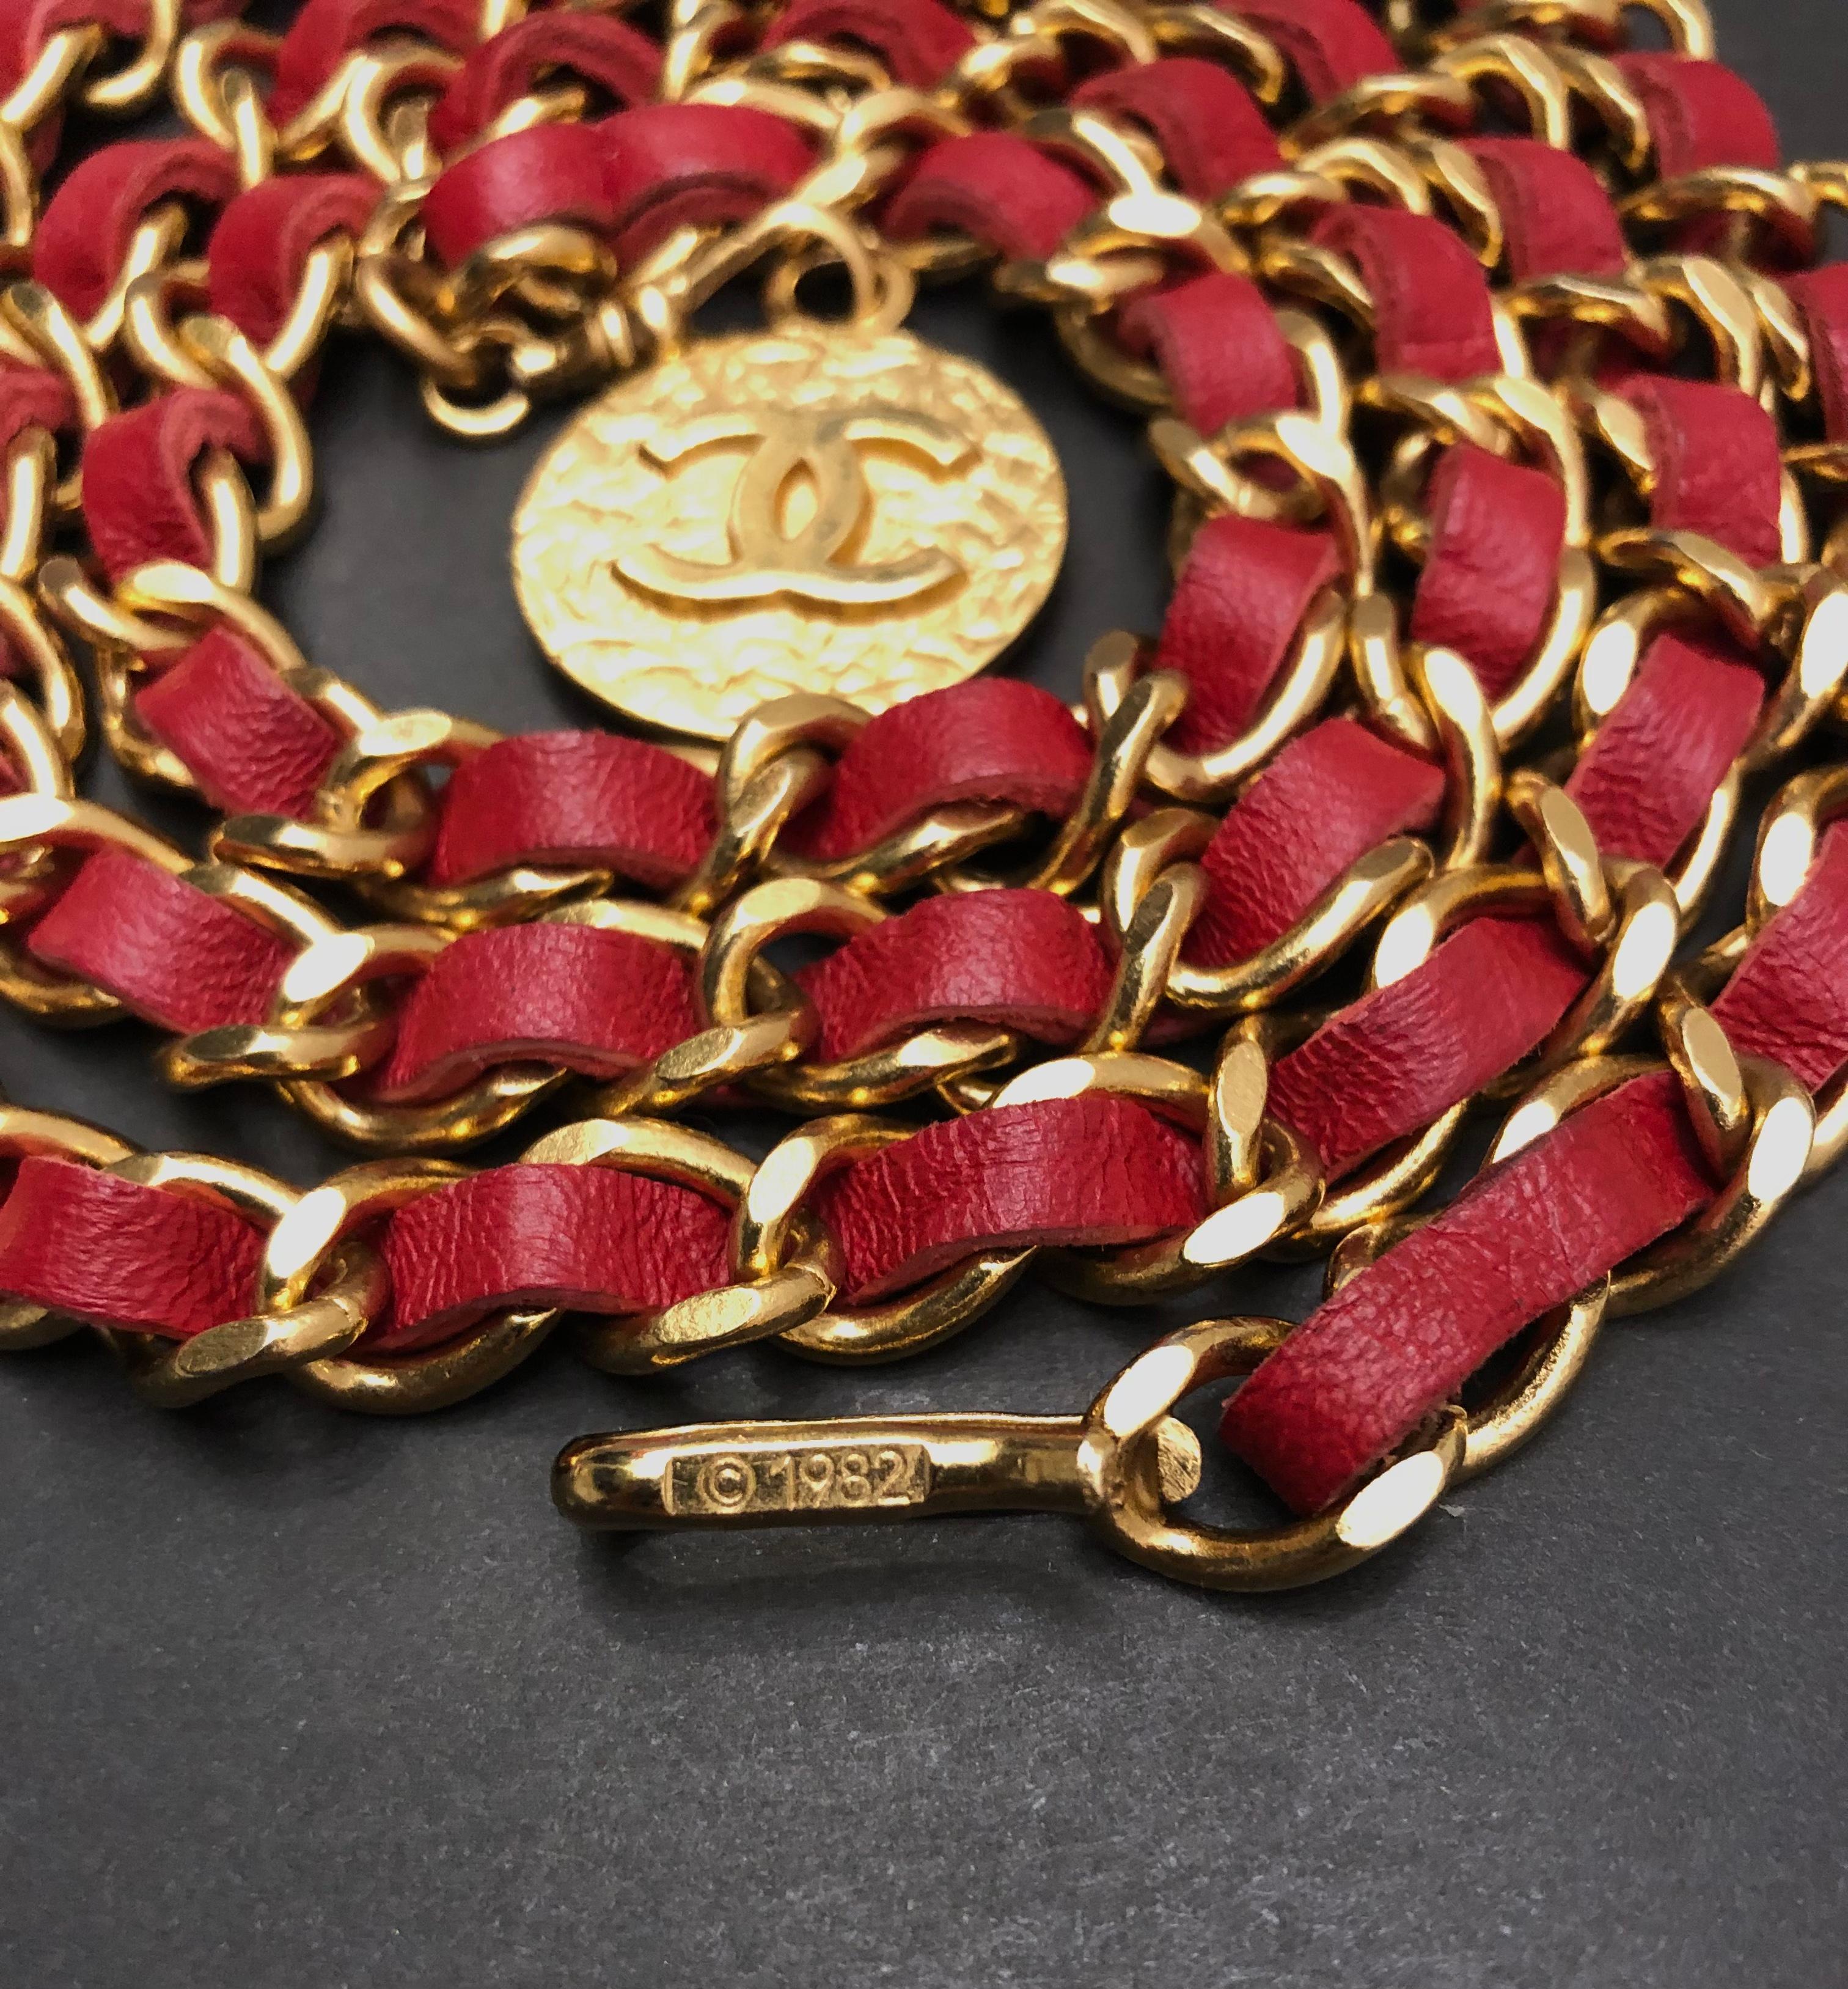 This vintage Chanel leather chain belt is crafted of slim gold toned chain interlaced with red leather featuring a CC coin. Adjustable hook fastening. Length excluding coin measures approximately 37 inches (94 cm). It can be worn as a belt or a